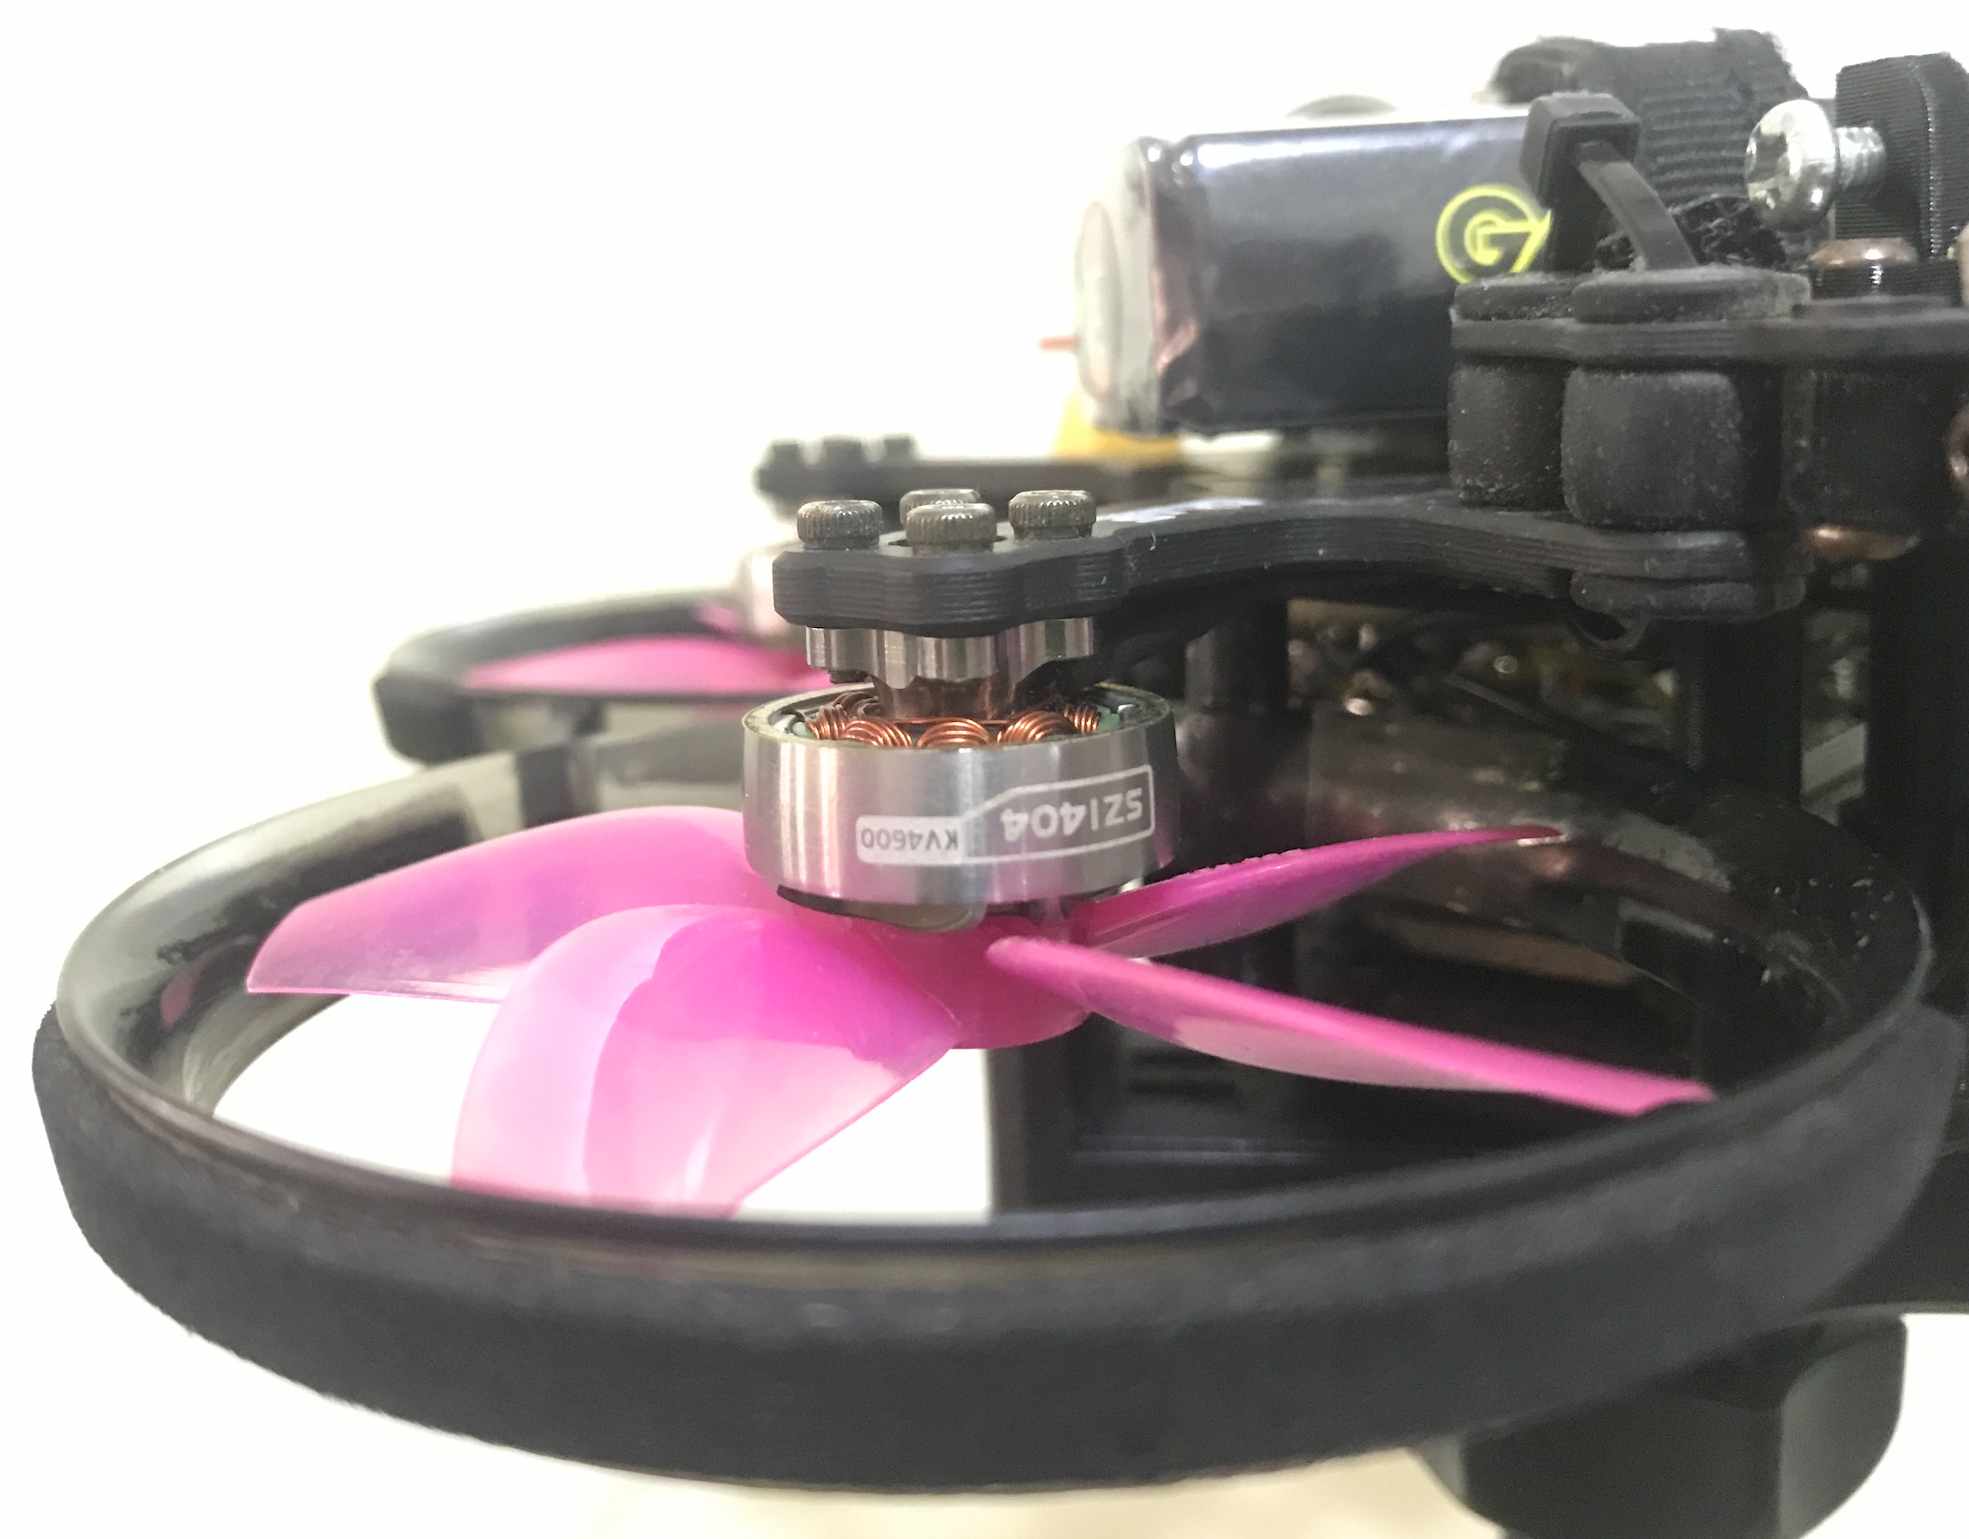 A cinewhoop drone with MEPS SZ1404 motors